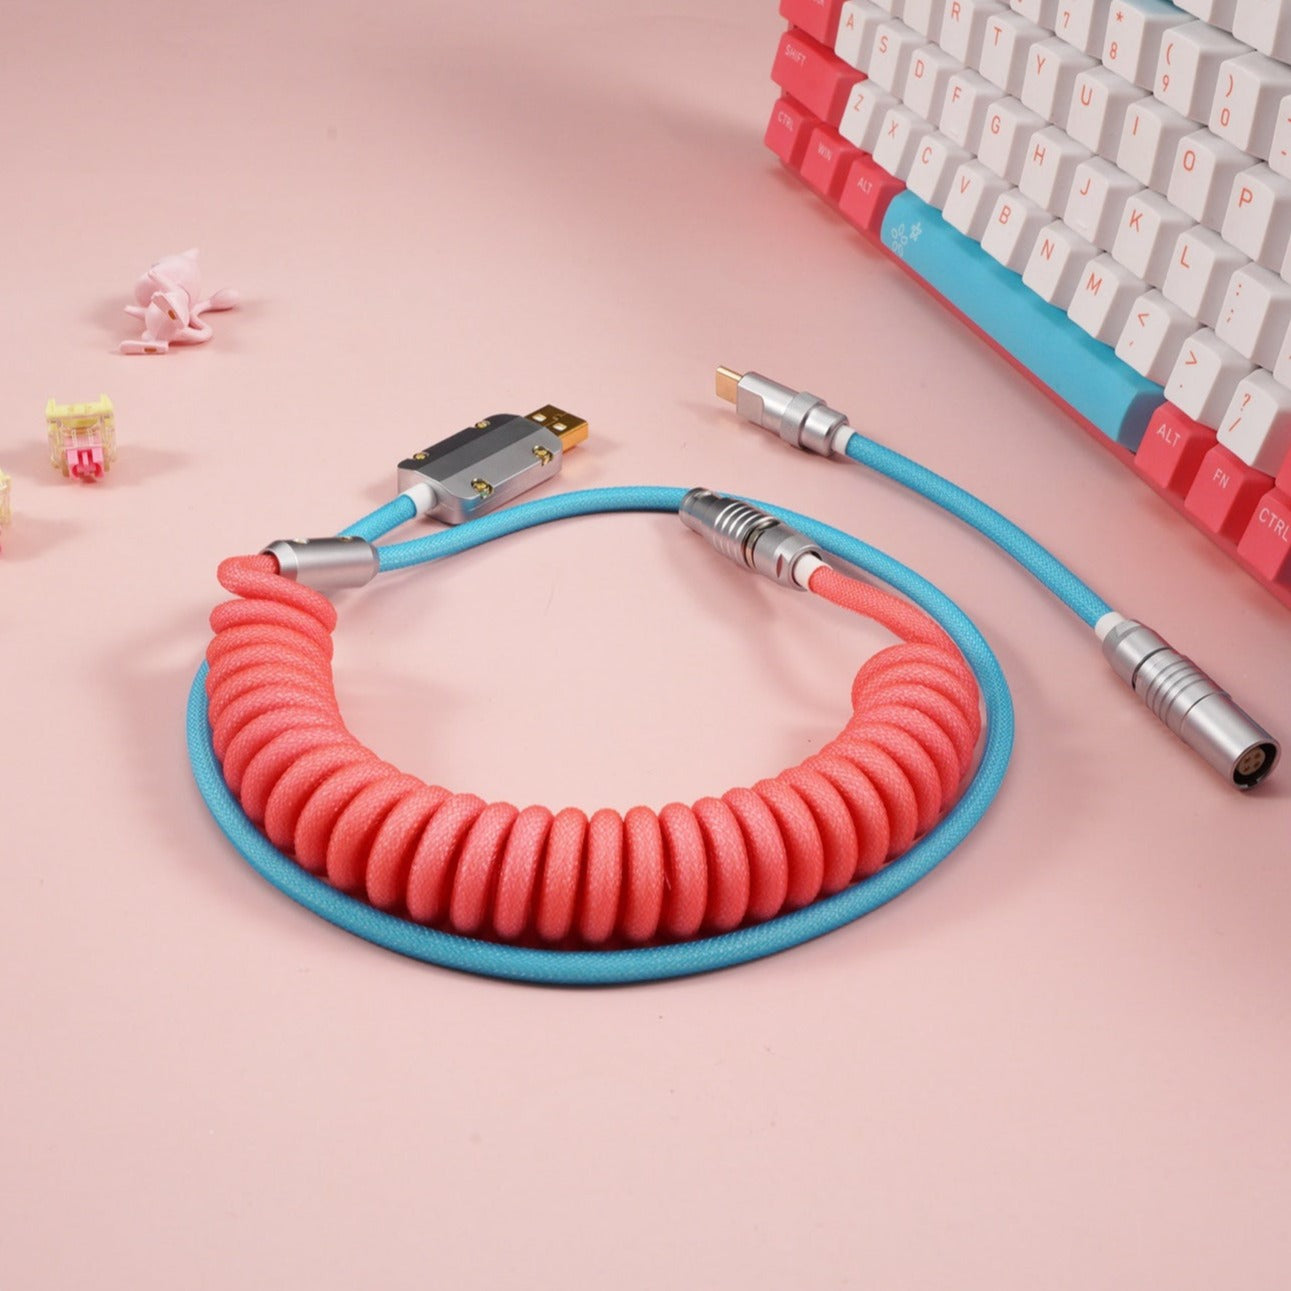 Sleeved Coiled Keyboard Aviator Cable, Lemo Style Connector - Pink/Teal